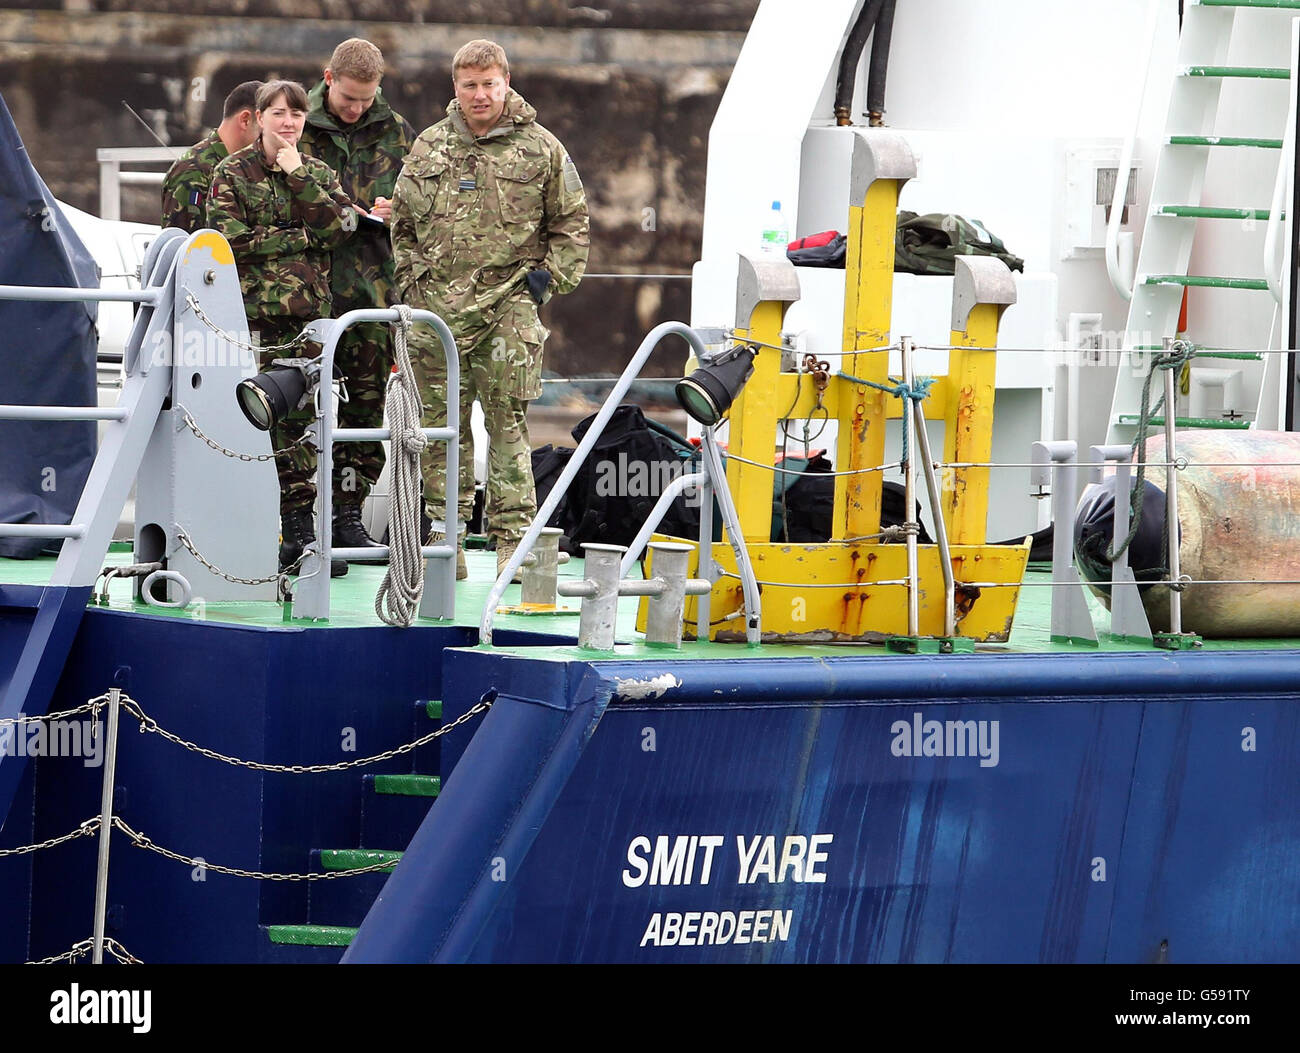 RAF personnel on board 'Smit Yare', a vessel at Buckie harbor on the Moray coast, as the vessel appeared to be preparing to leave port to take part in the salvage operation, after two Tornados crashed yesterday. Wreckage was brought ashore last night by Buckie Lifeboat. Stock Photo